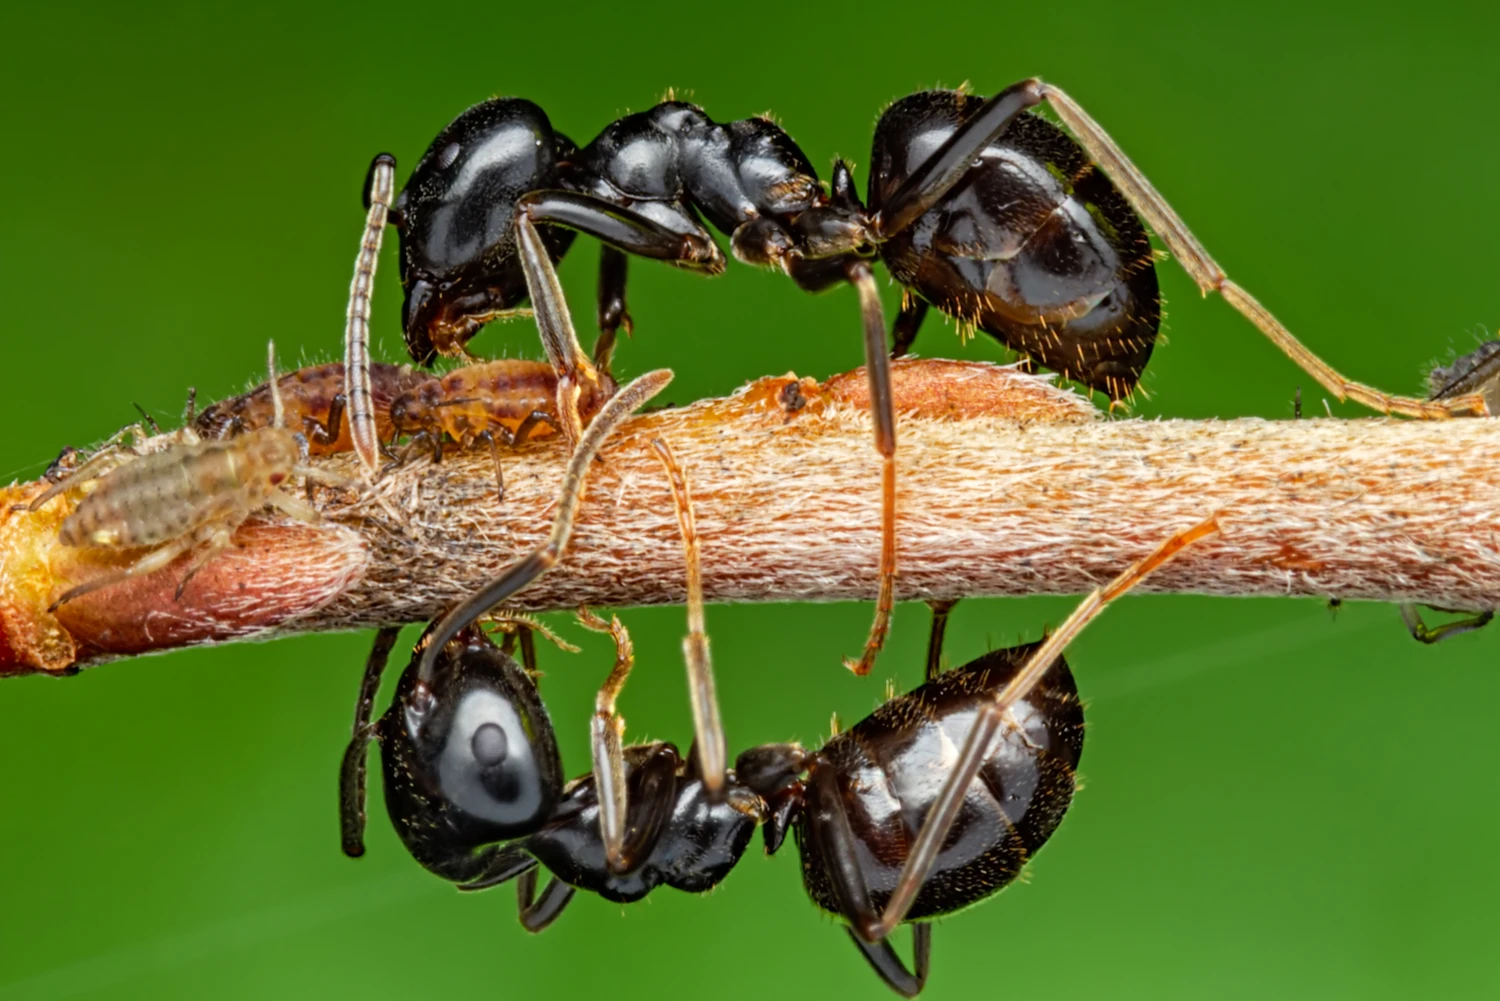 Ants Can Aid Early Cancer Detection — Scientists